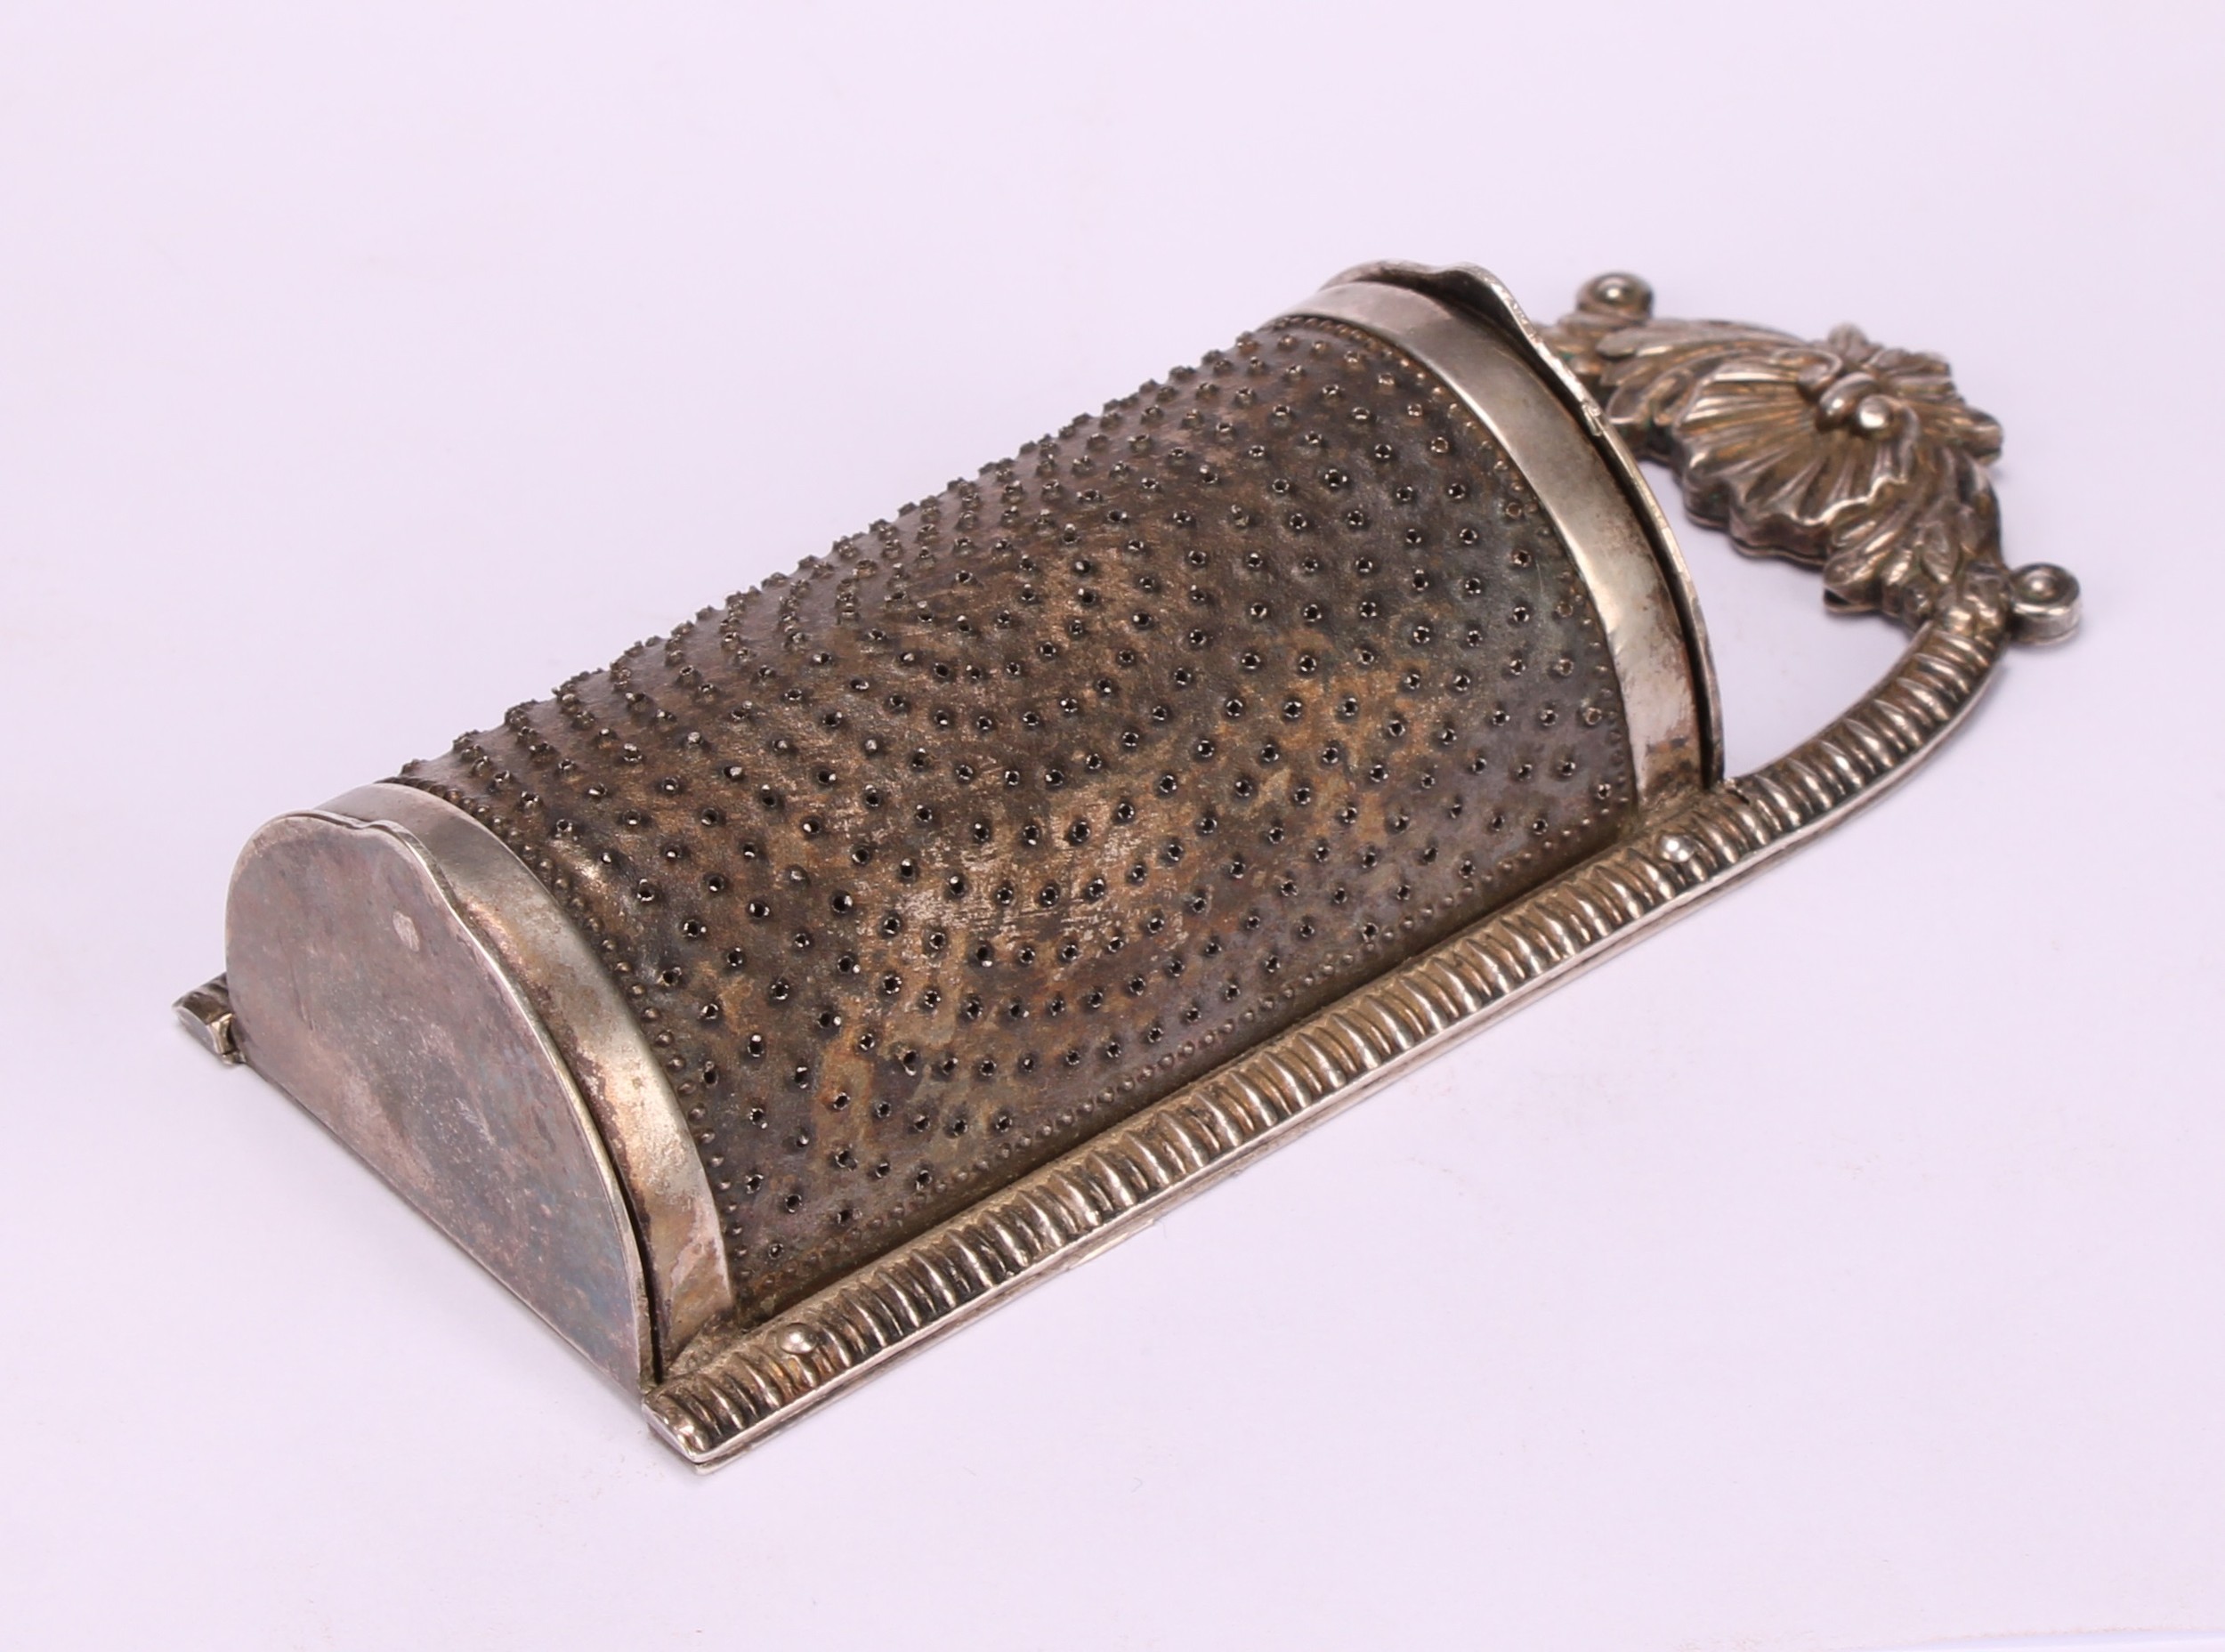 A George III style plated nutmeg grater, Dubarry Pro Patent, Rd. 765097, 10.5cm high, 20th century - Image 3 of 5